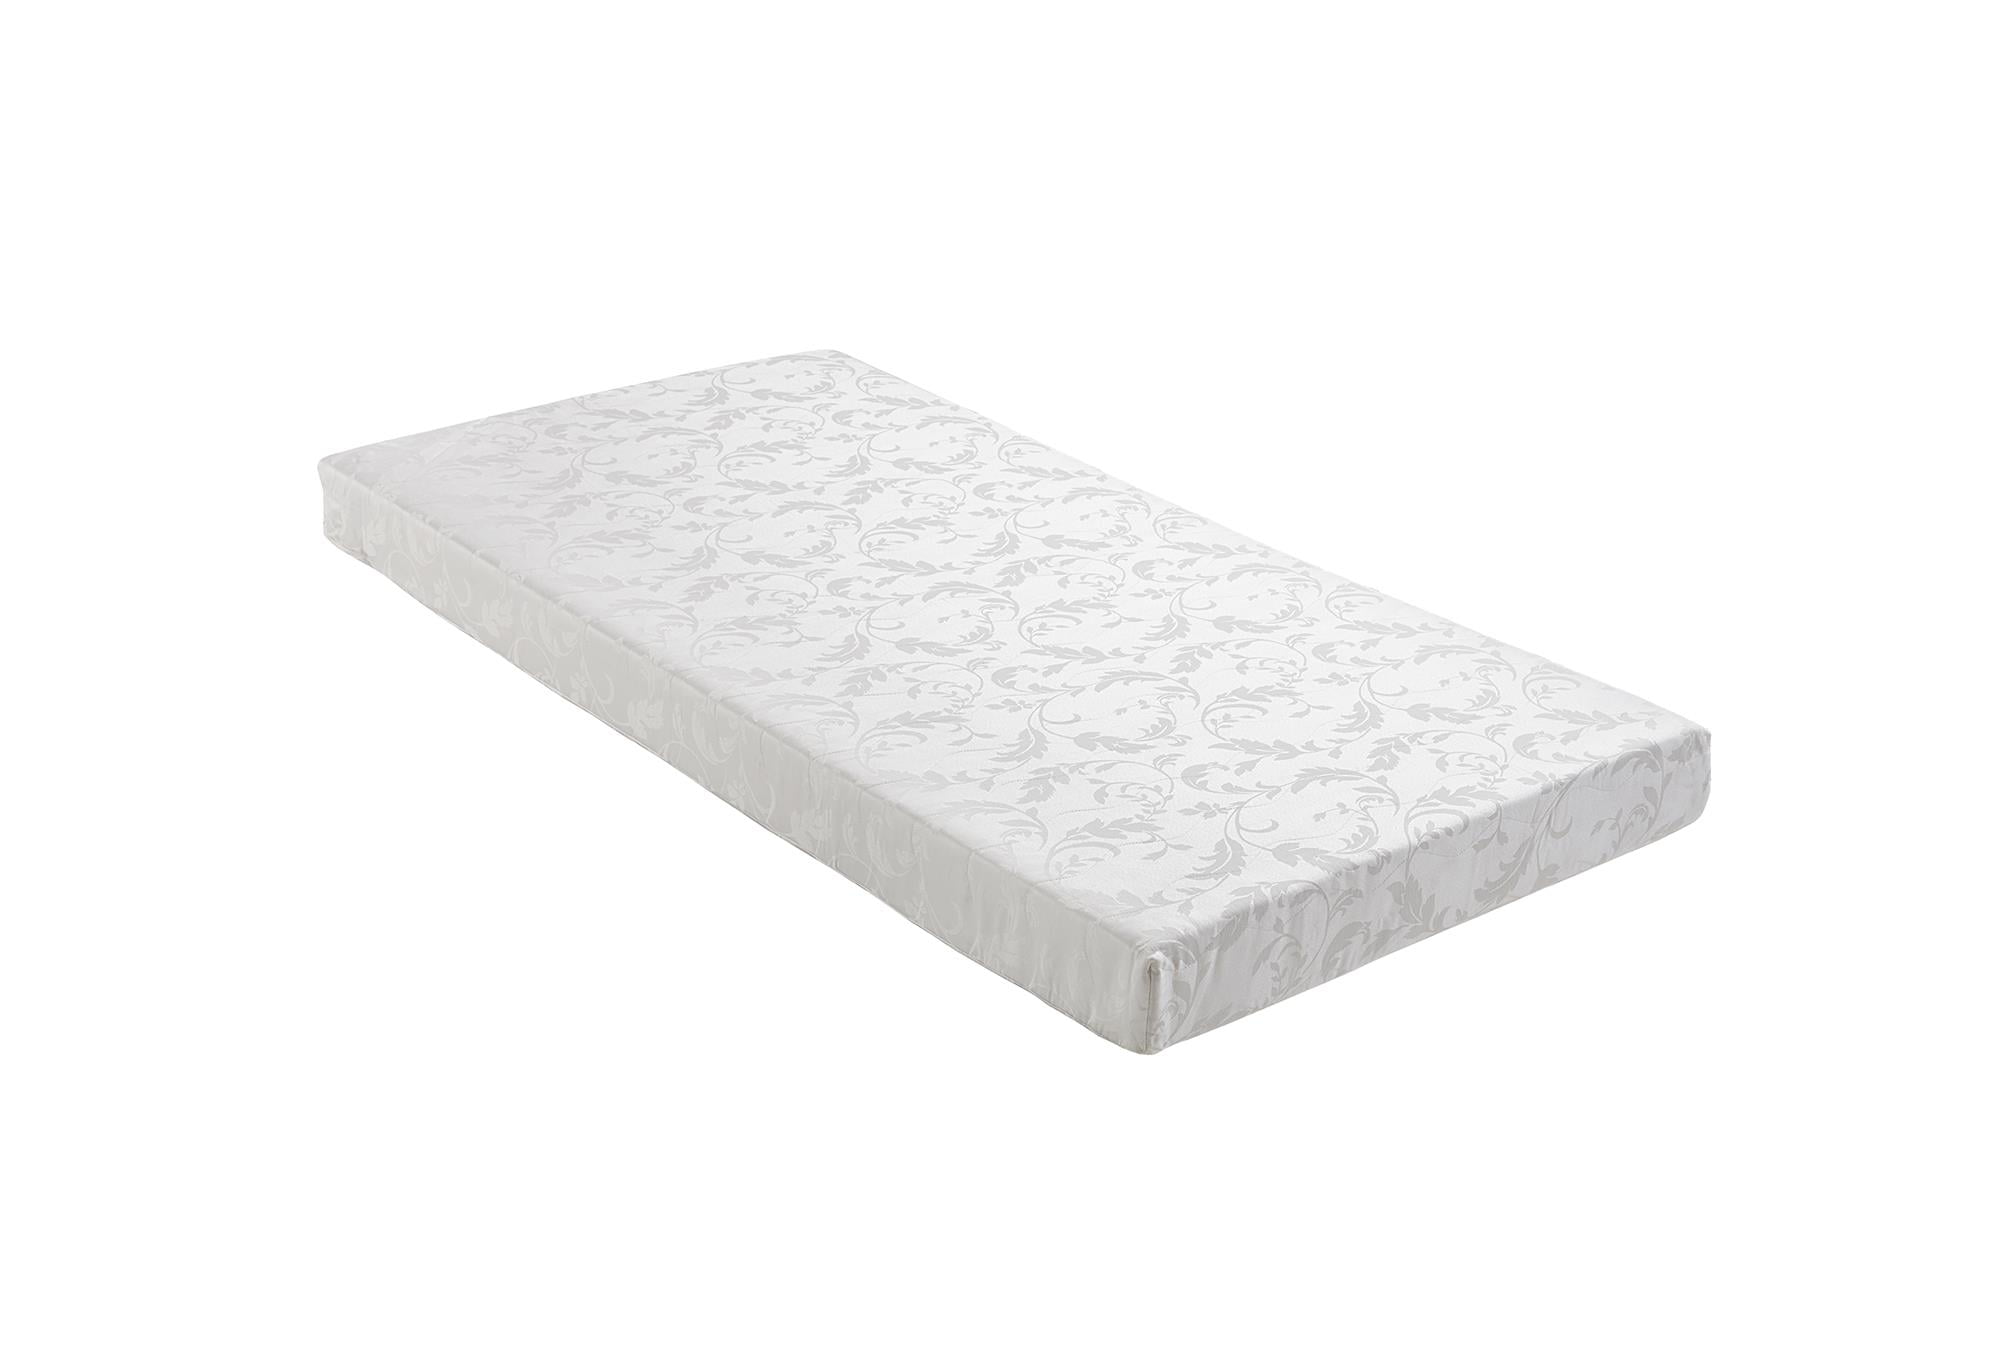 Details about   Mattress 6 Inch Polyester Filled Bunk Bed Mattress with Jacquard Cover Twin, 